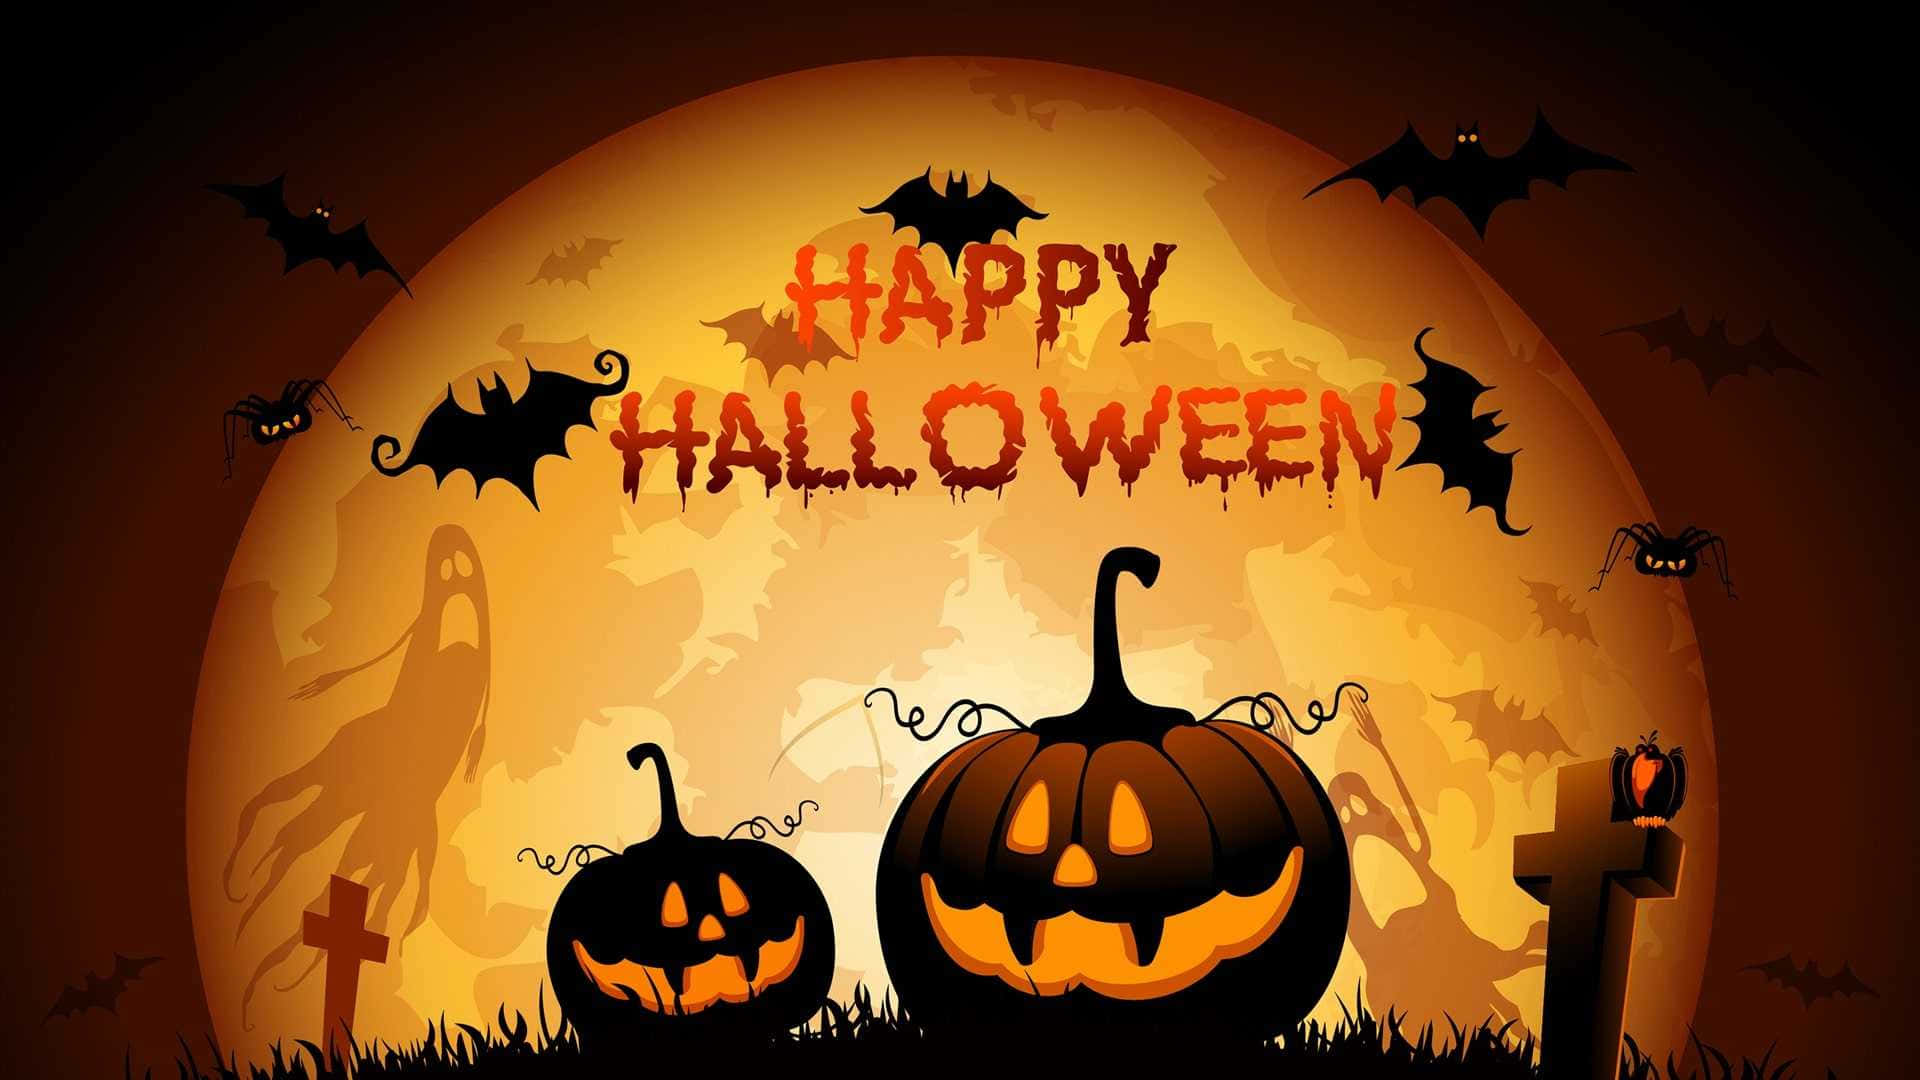 Join the spooky fun this Halloween! Wallpaper